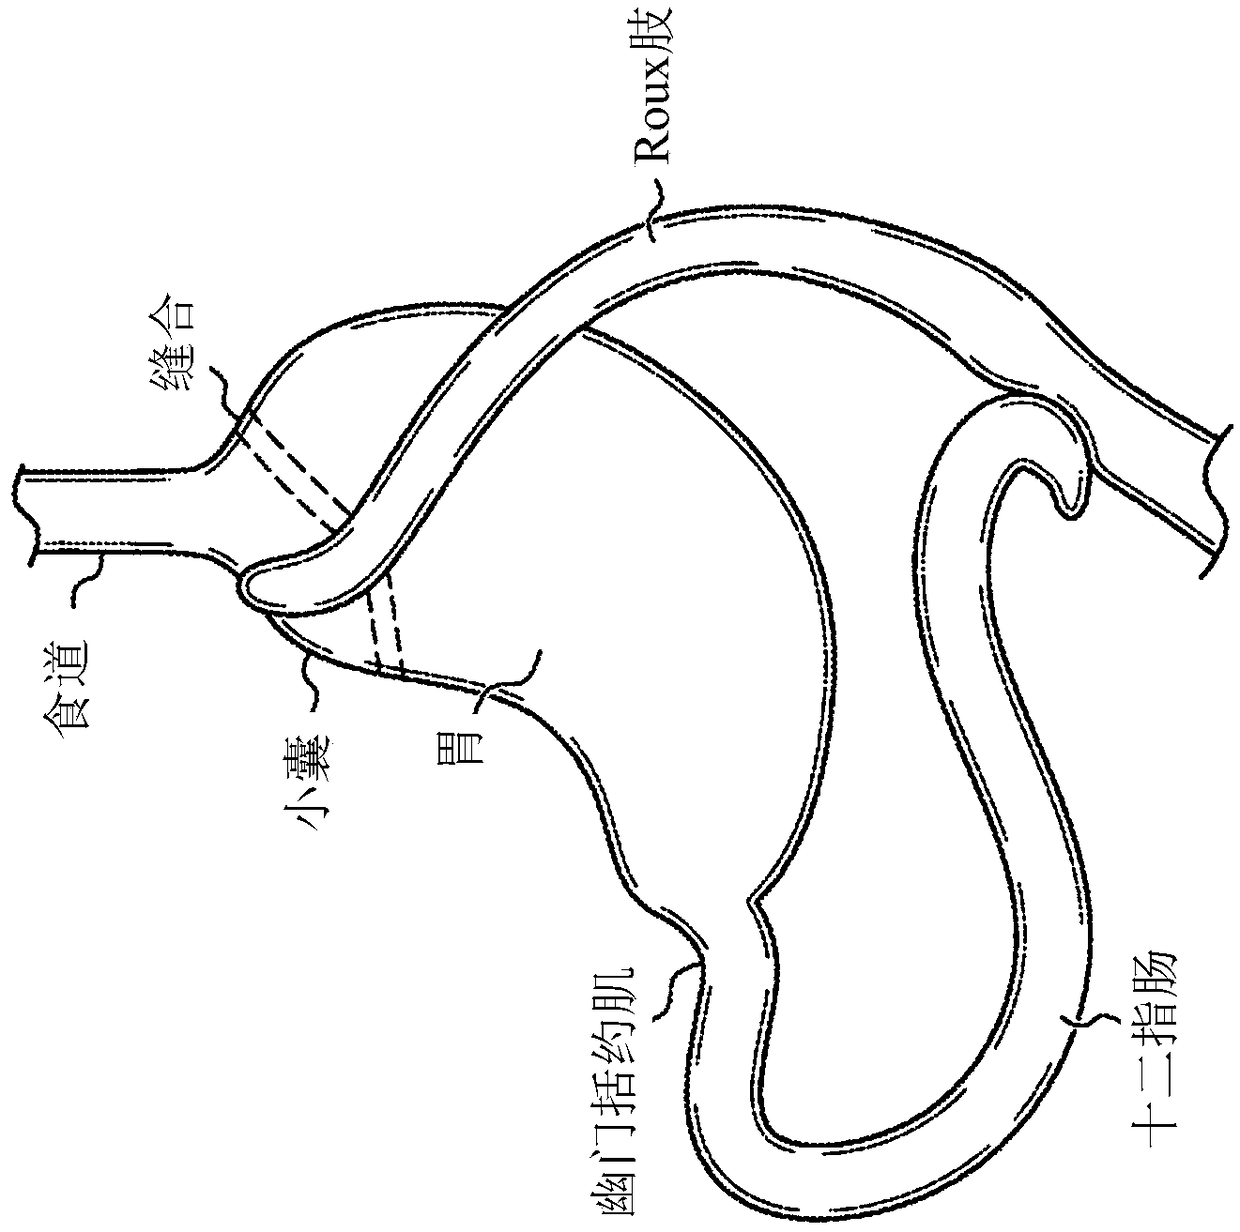 Medical device and method for preventing bile reflux following bariatric surgery